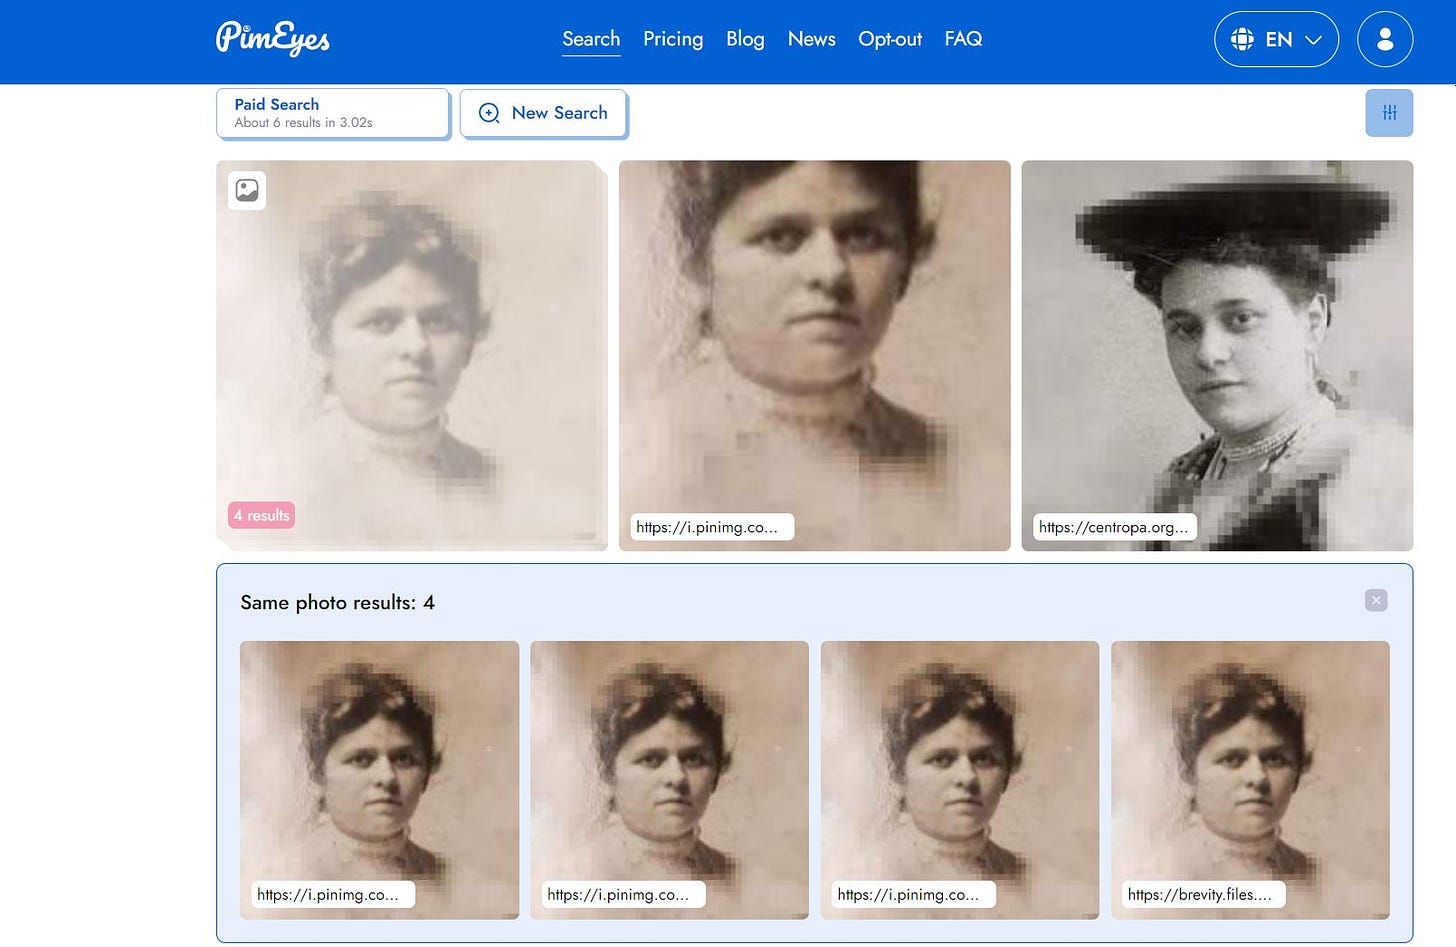 The results of the facial recognition search, which shows two matches.